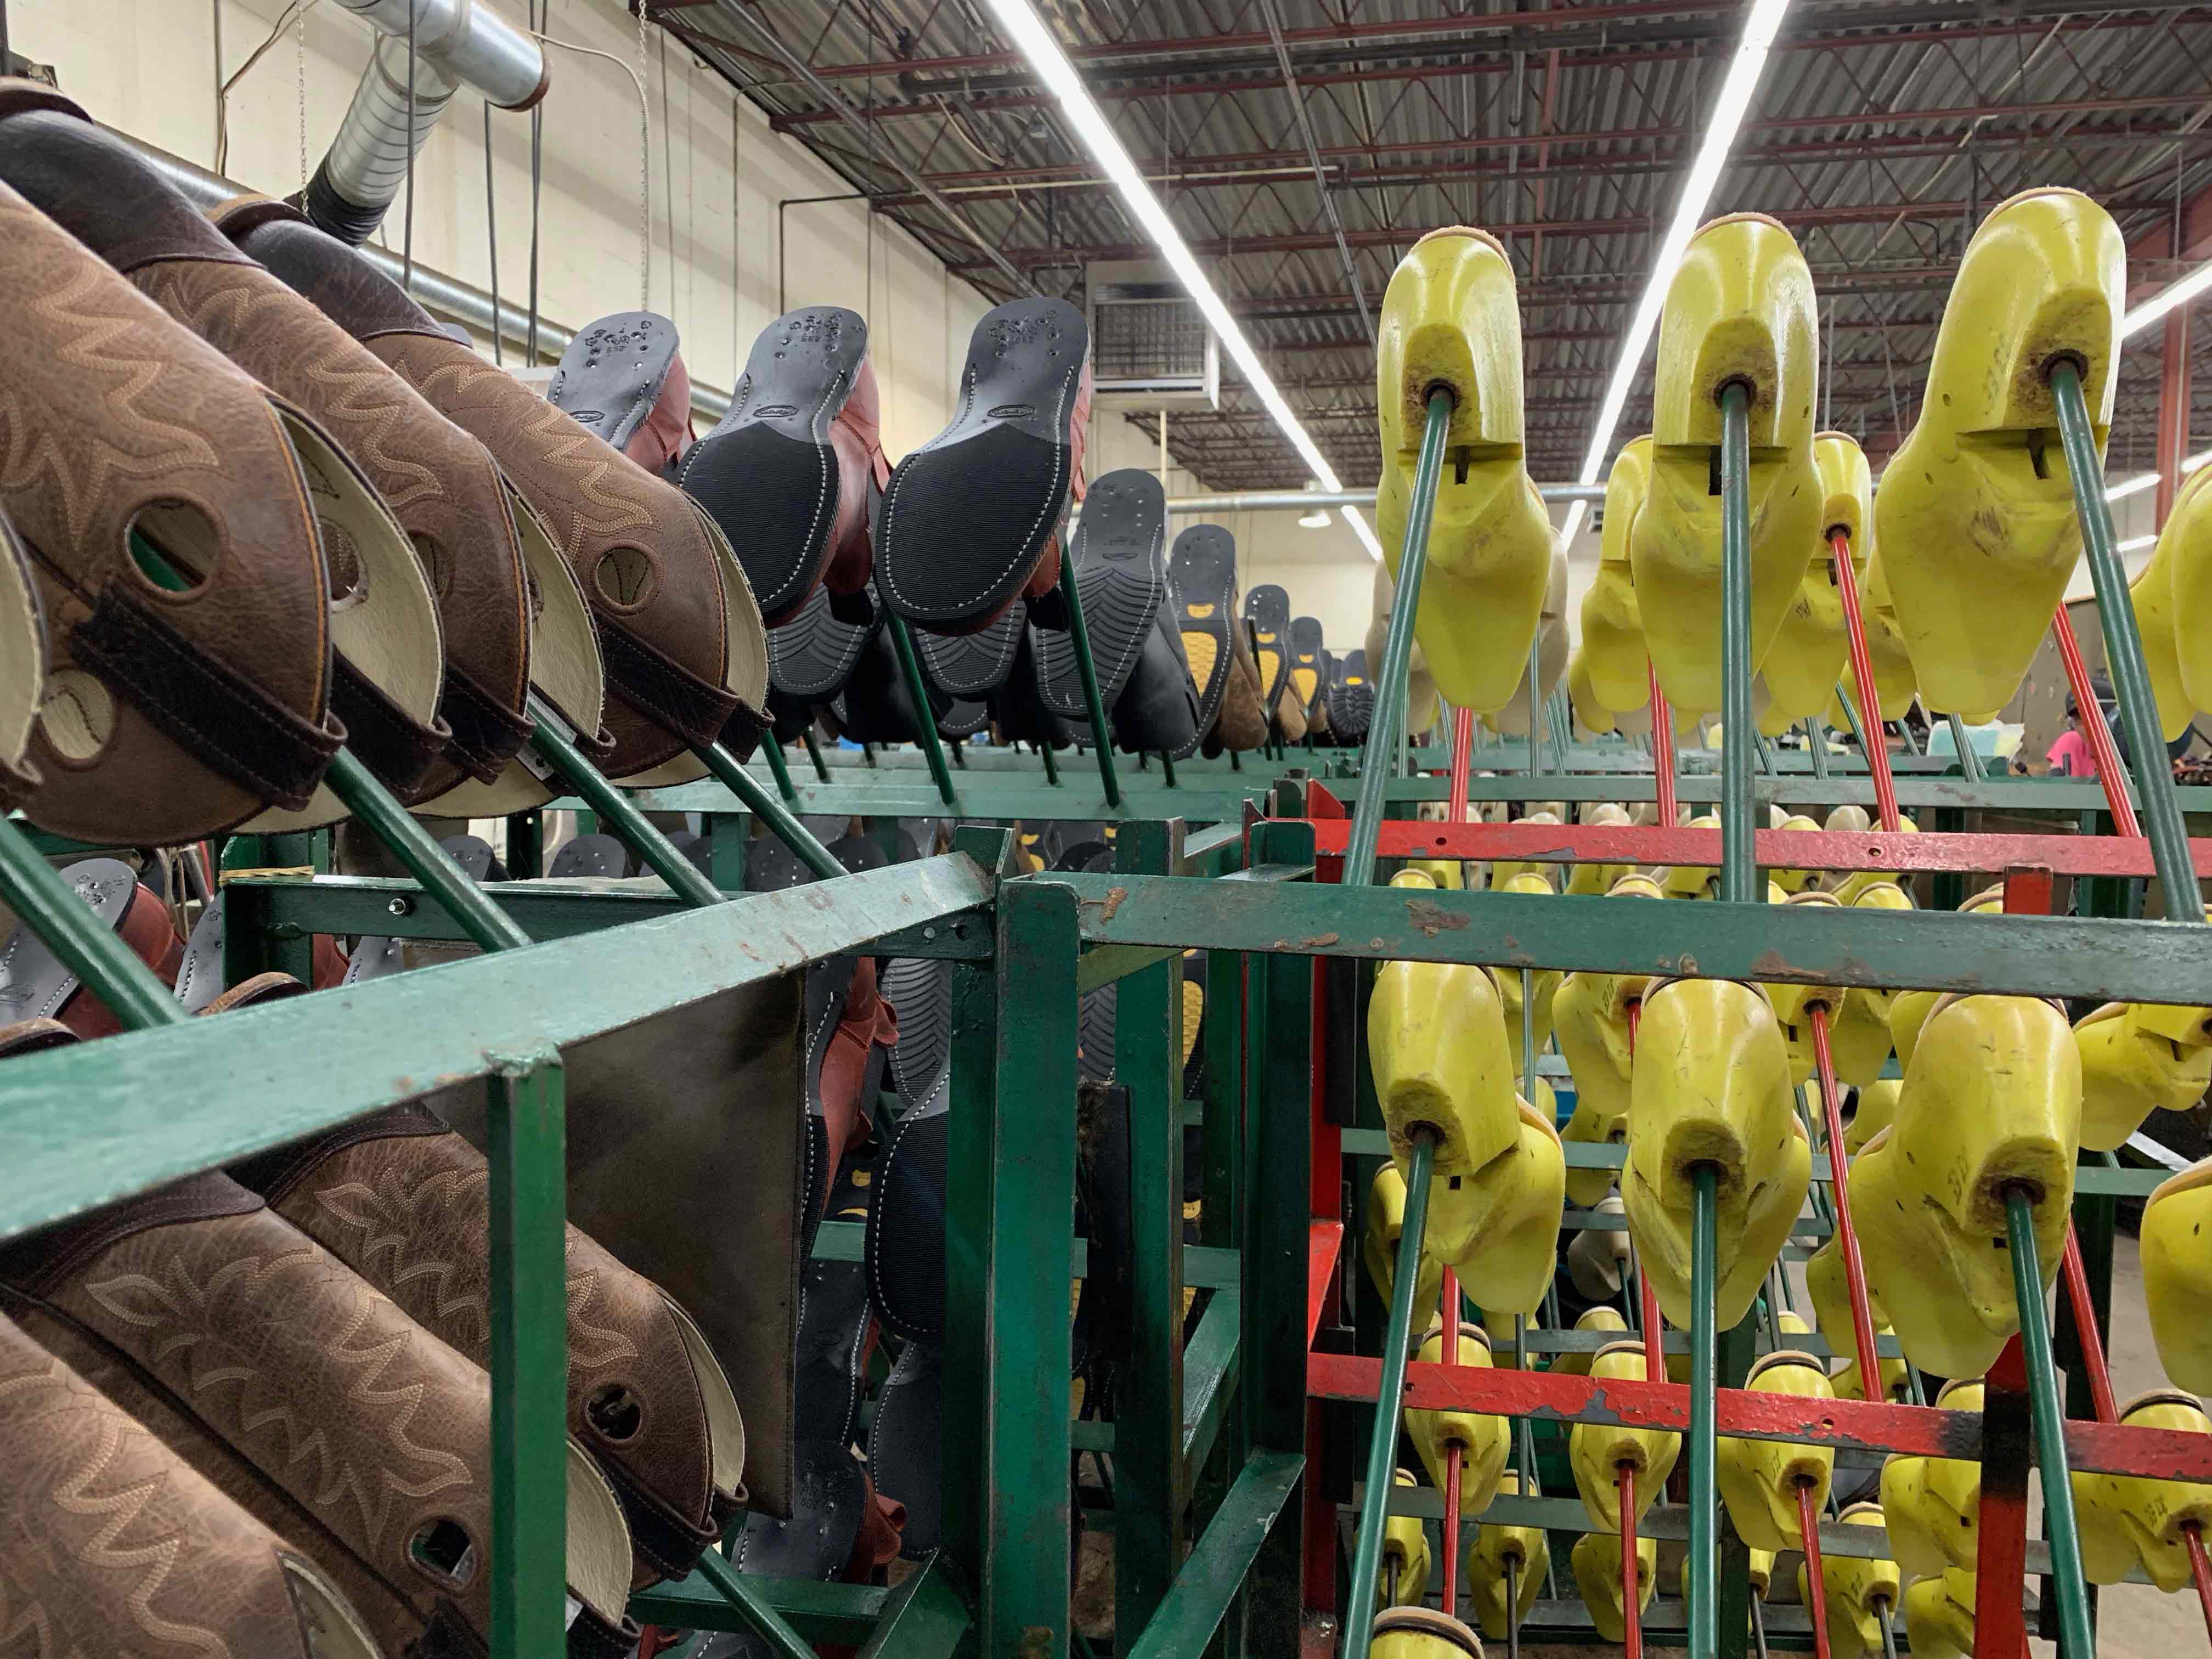 The various shoes and molds sit on racks, waiting for the next stage of the process.